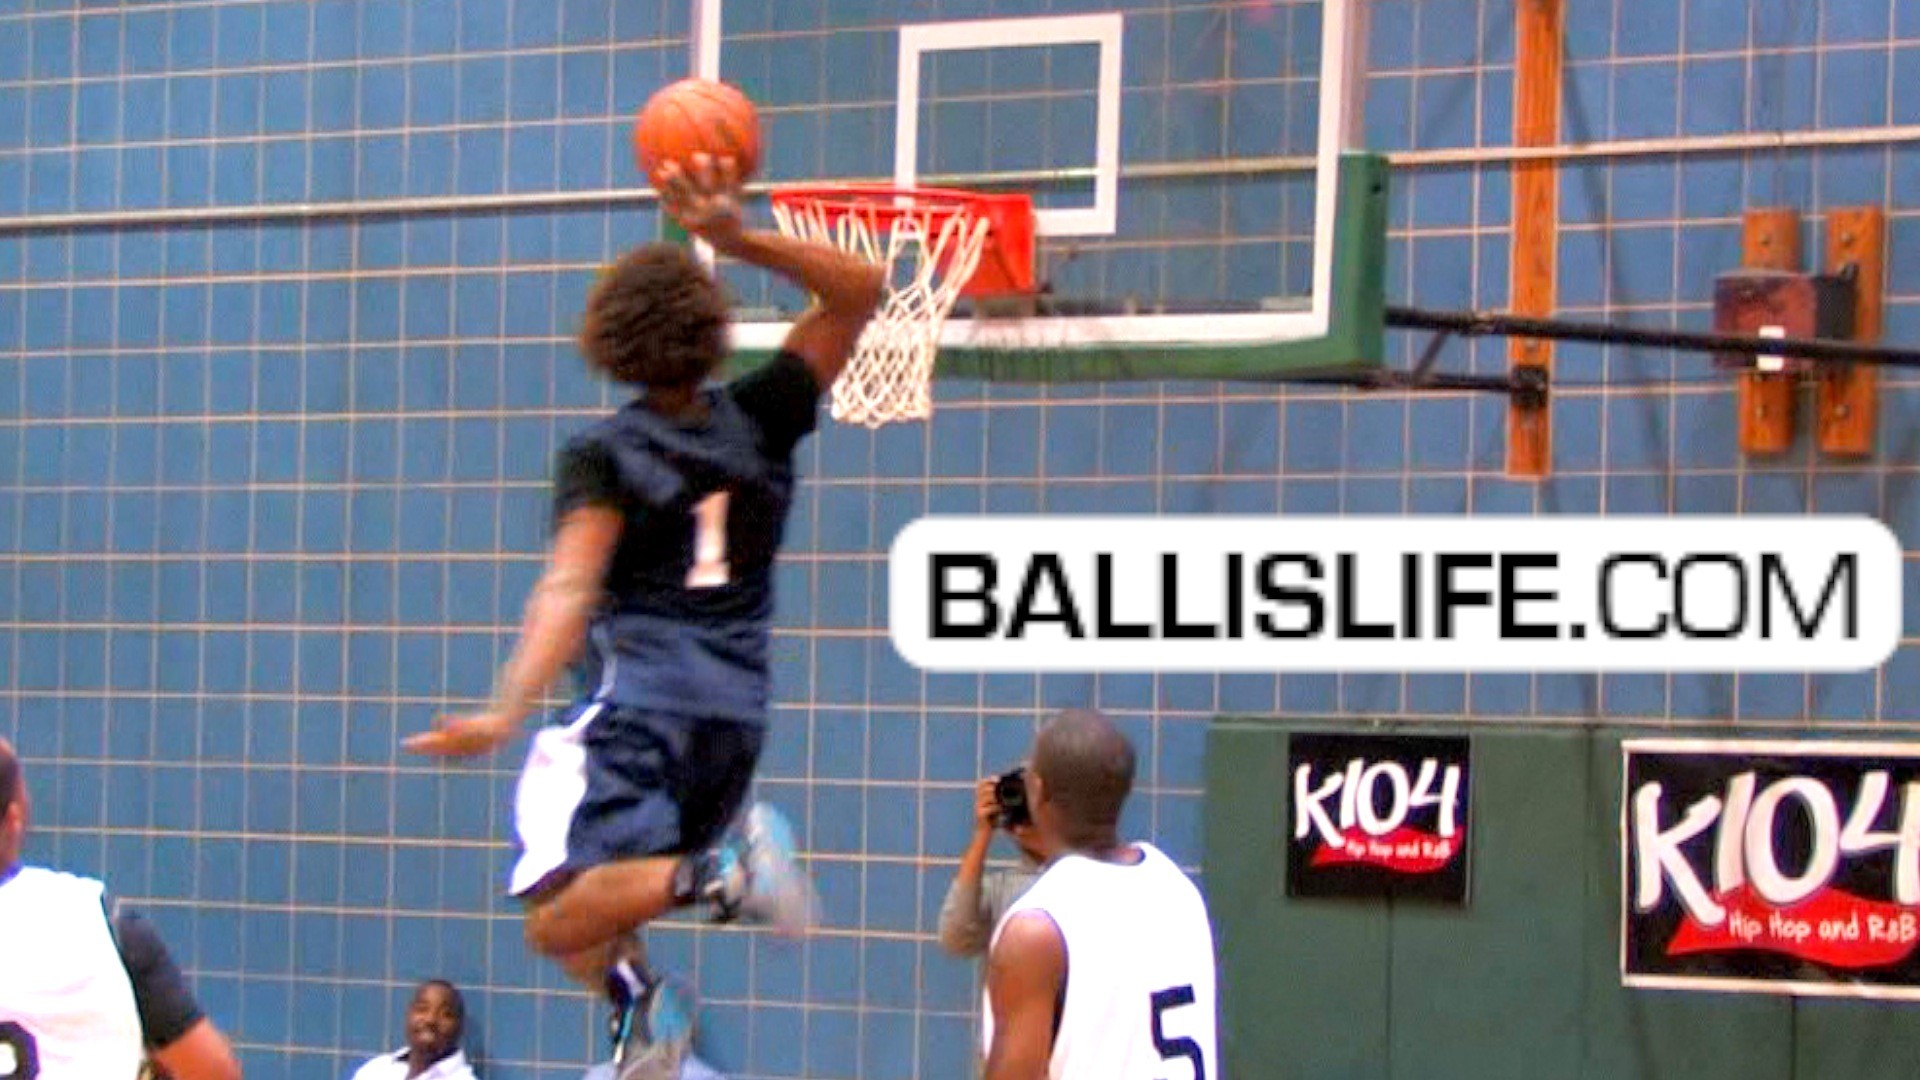 Top Plays From Josh Howard Celebrity Game Nick Young KD Go OFF Ballislife